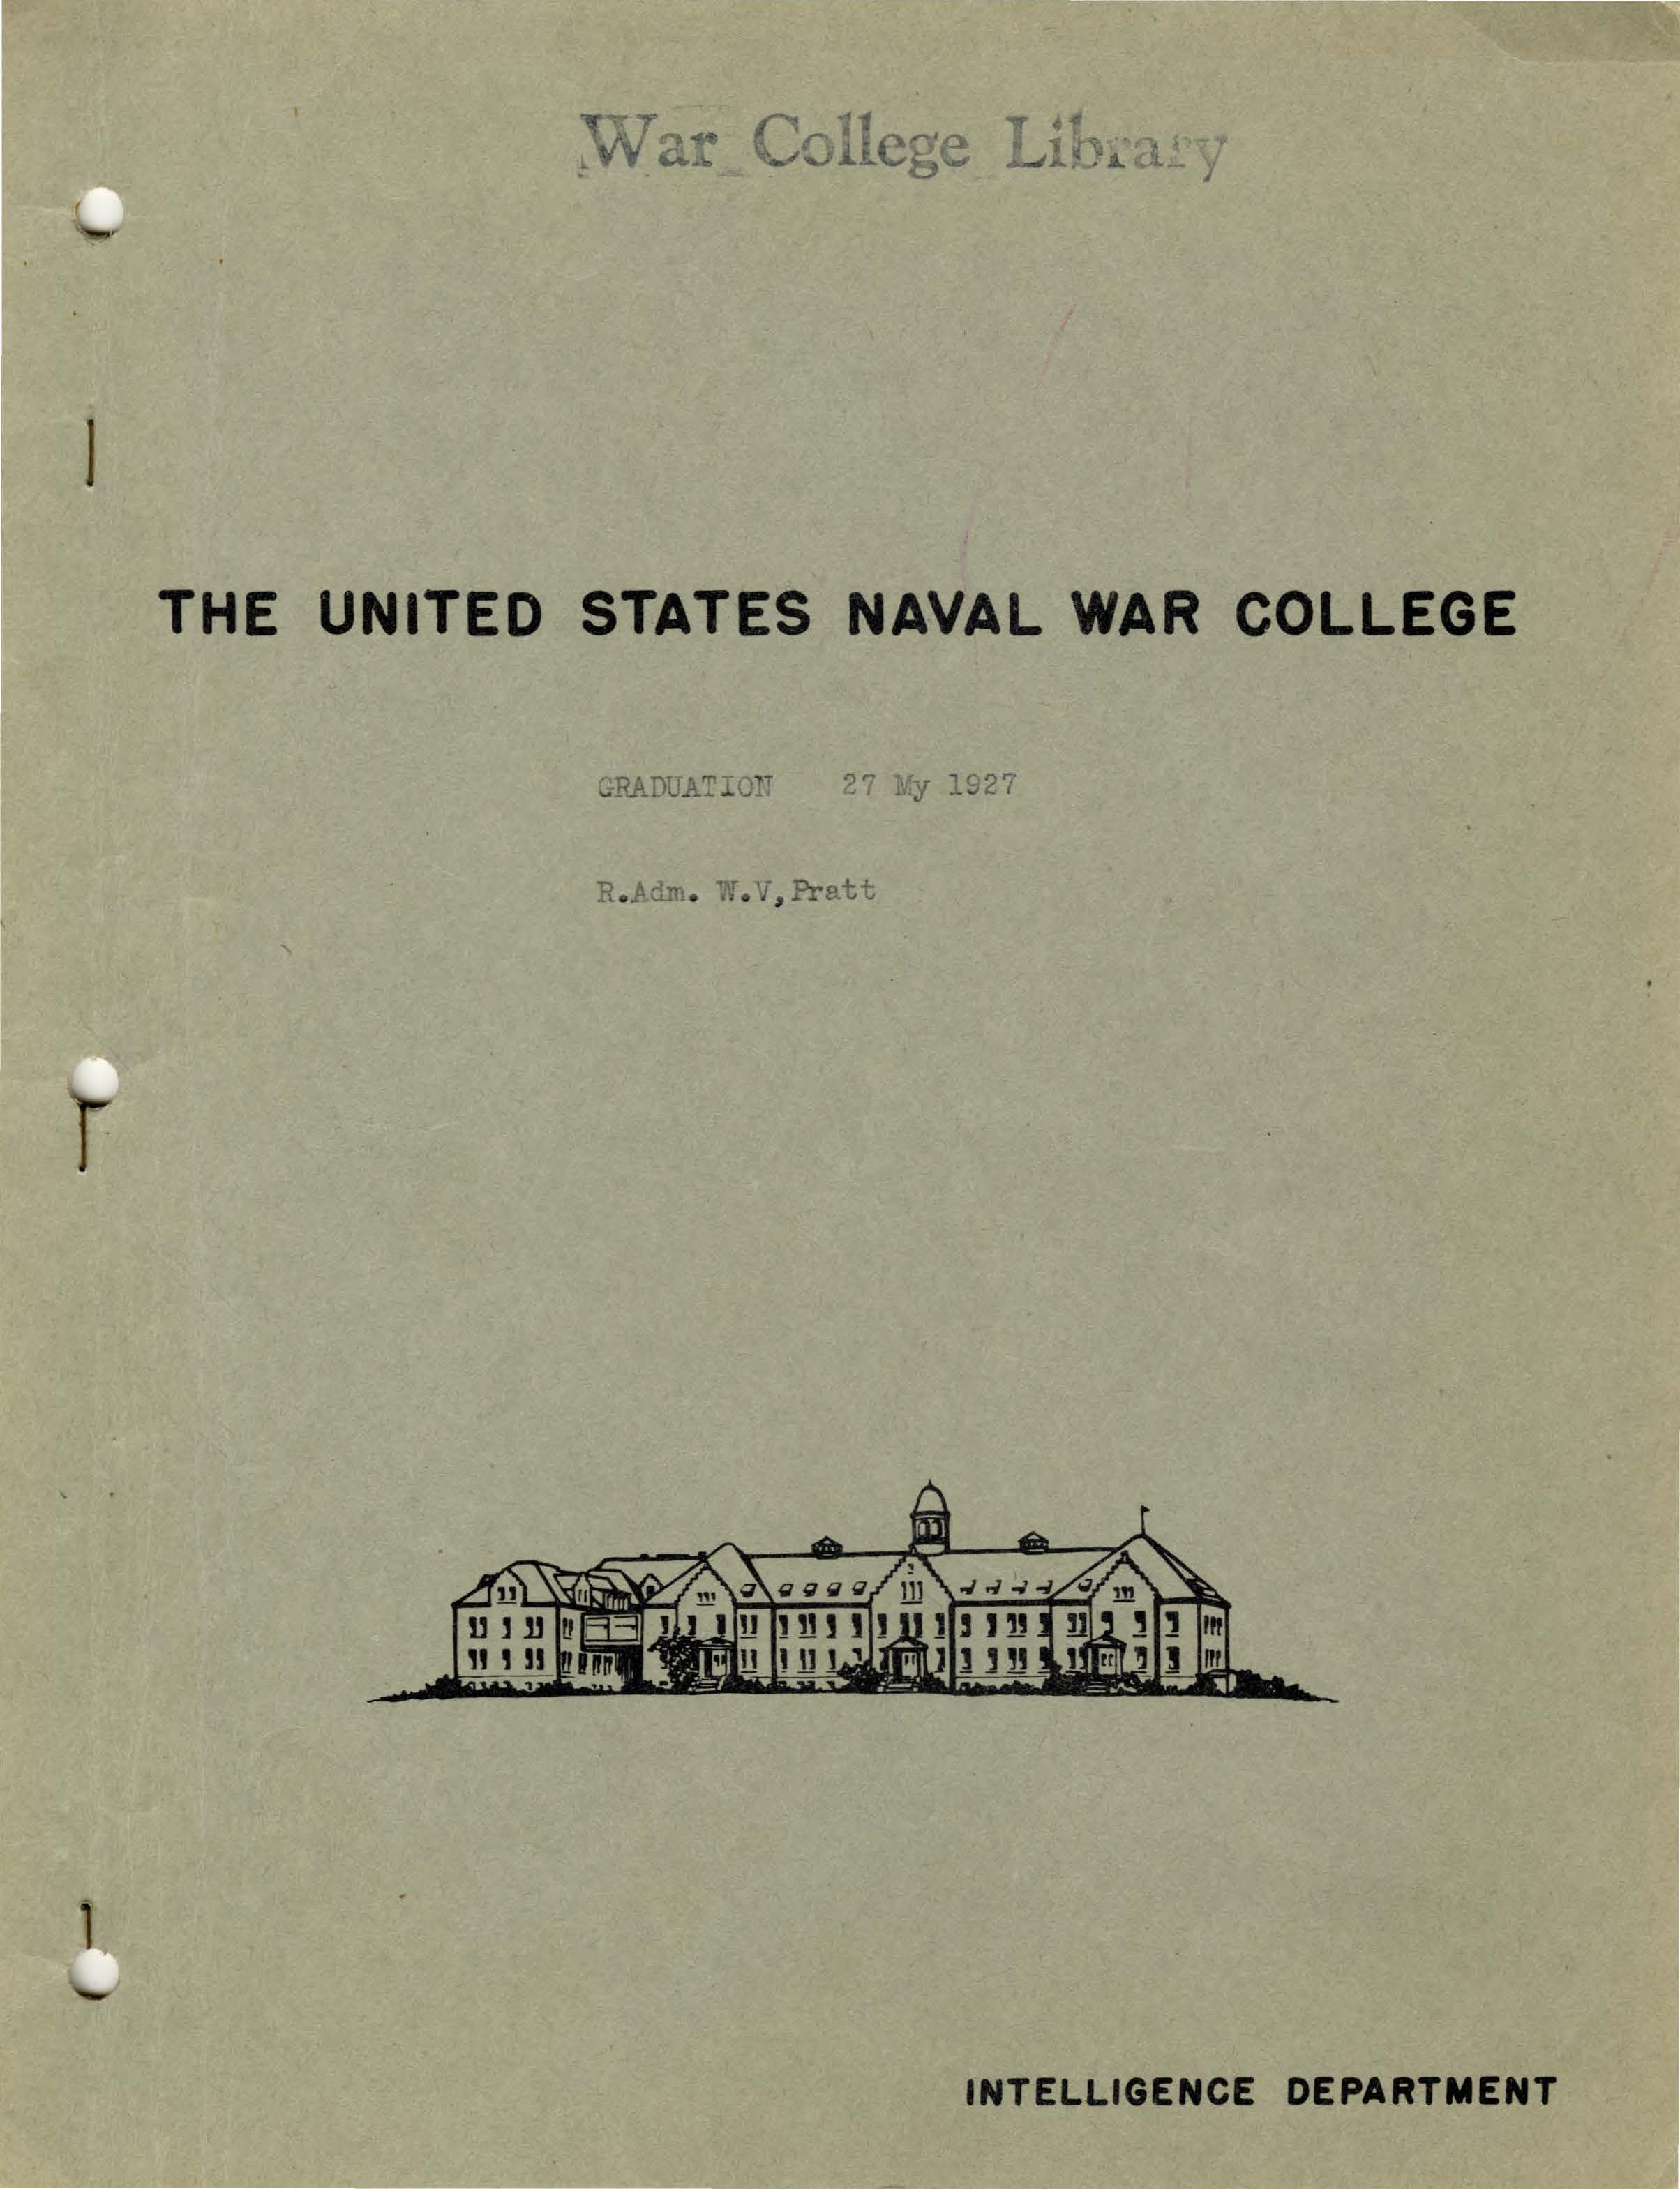 Three Phases of a Naval Career: Some Reflections of an Older Officer, William V. Pratt